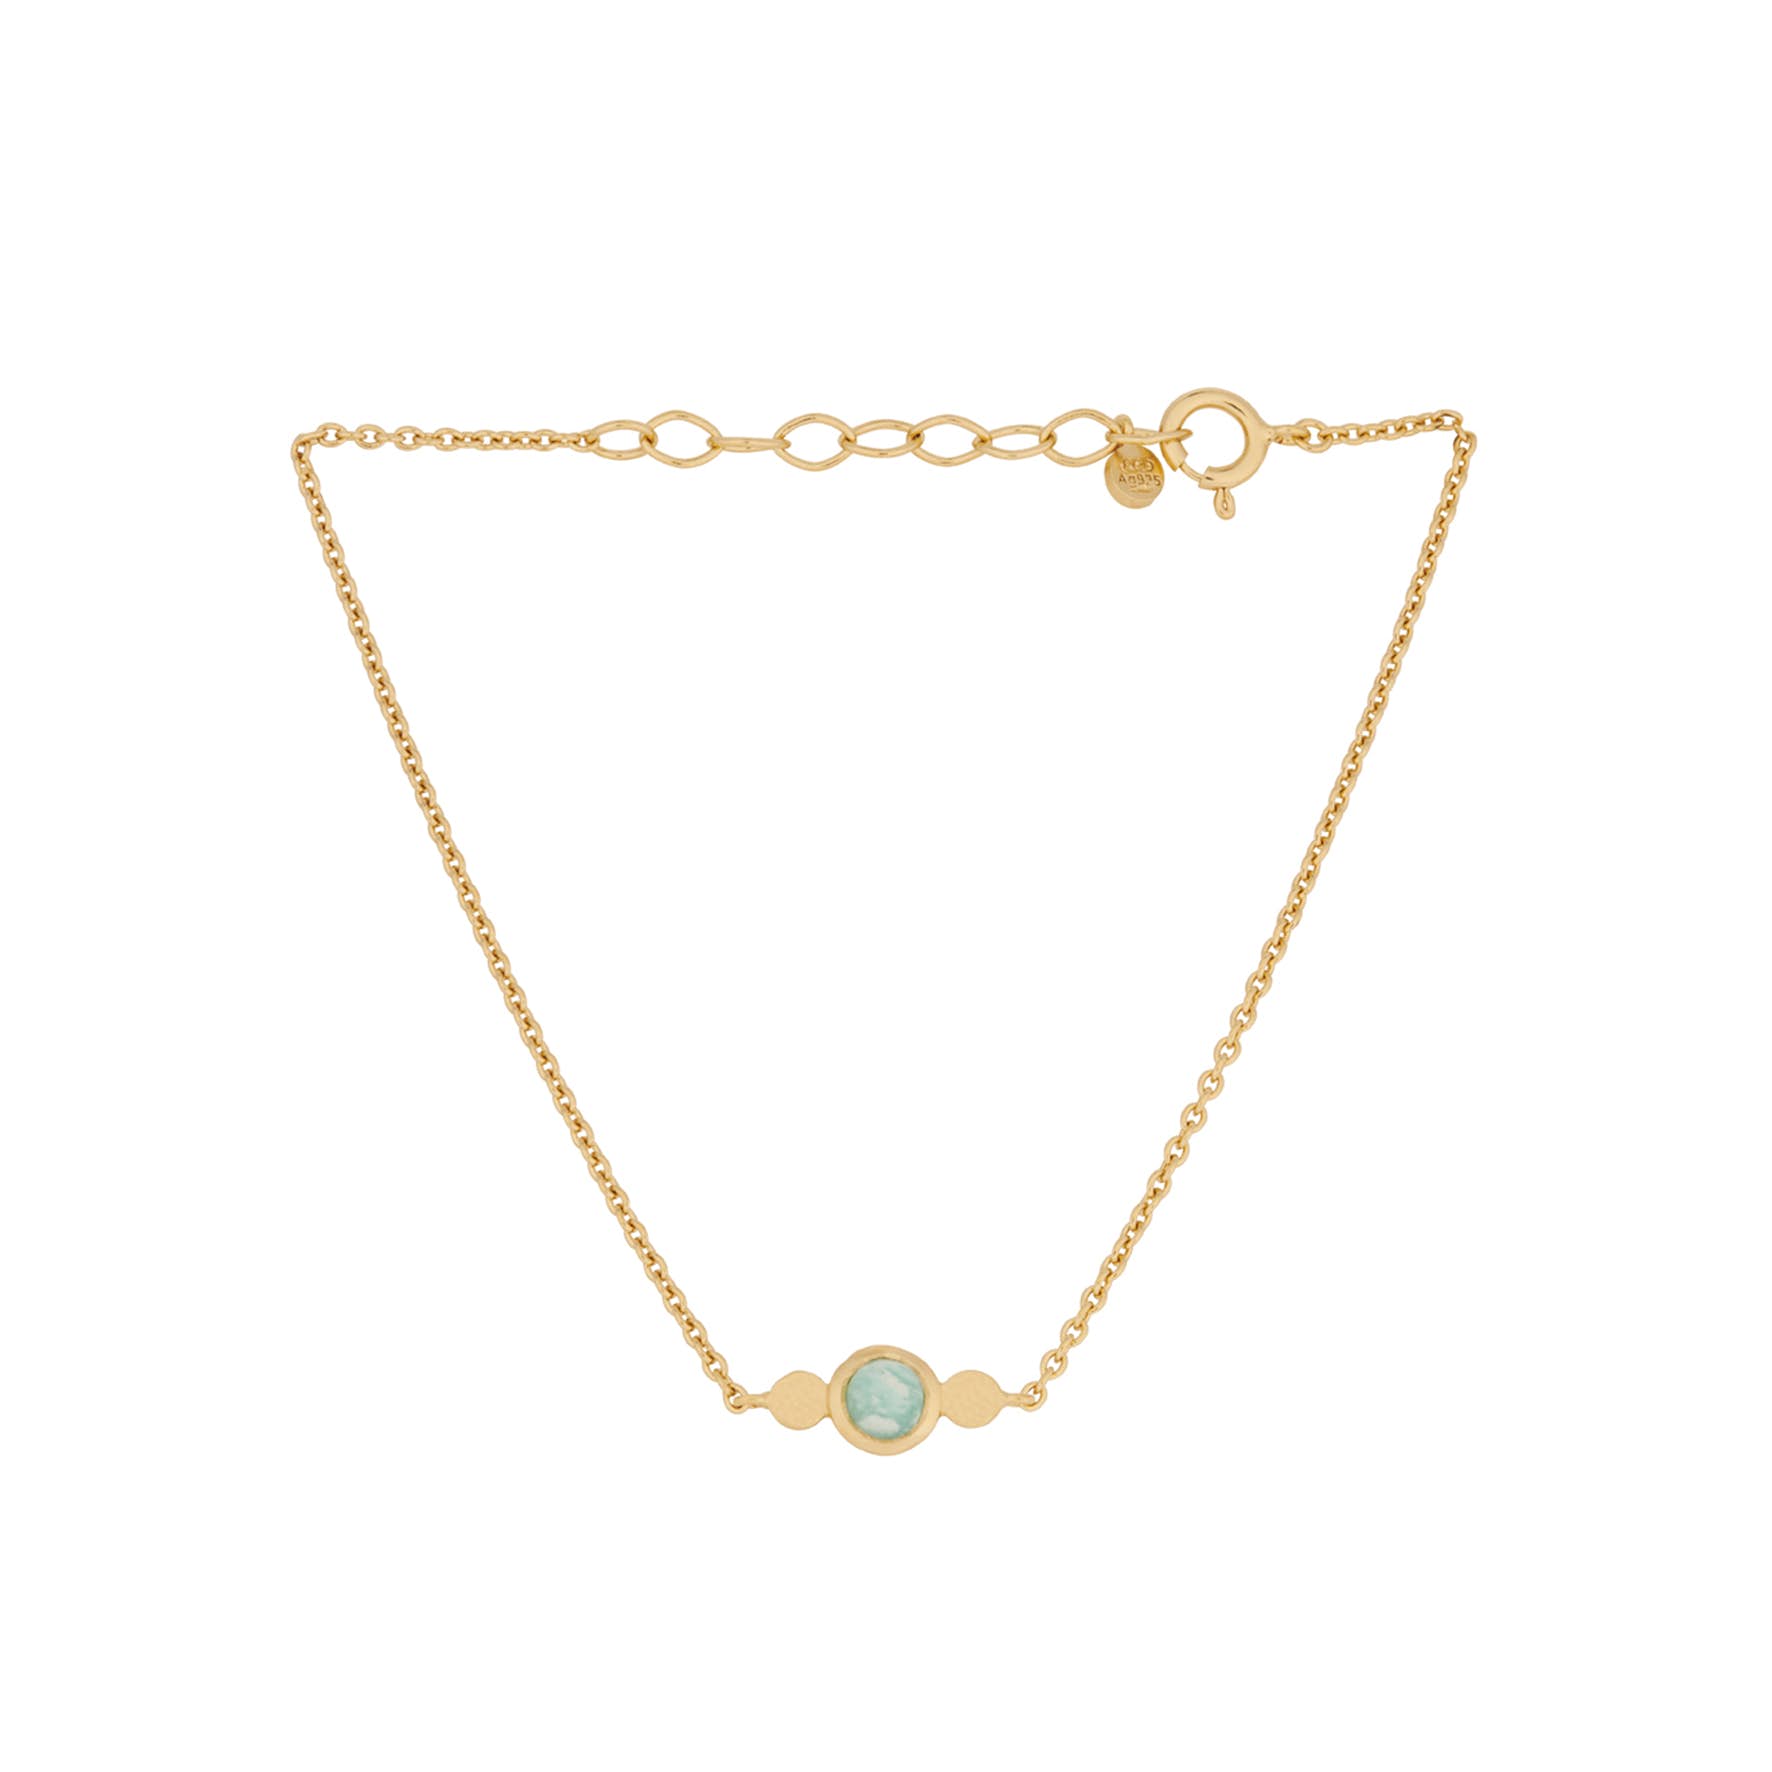 Fjord Bracelet from Pernille Corydon in Goldplated-Silver Sterling 925|Amazonite